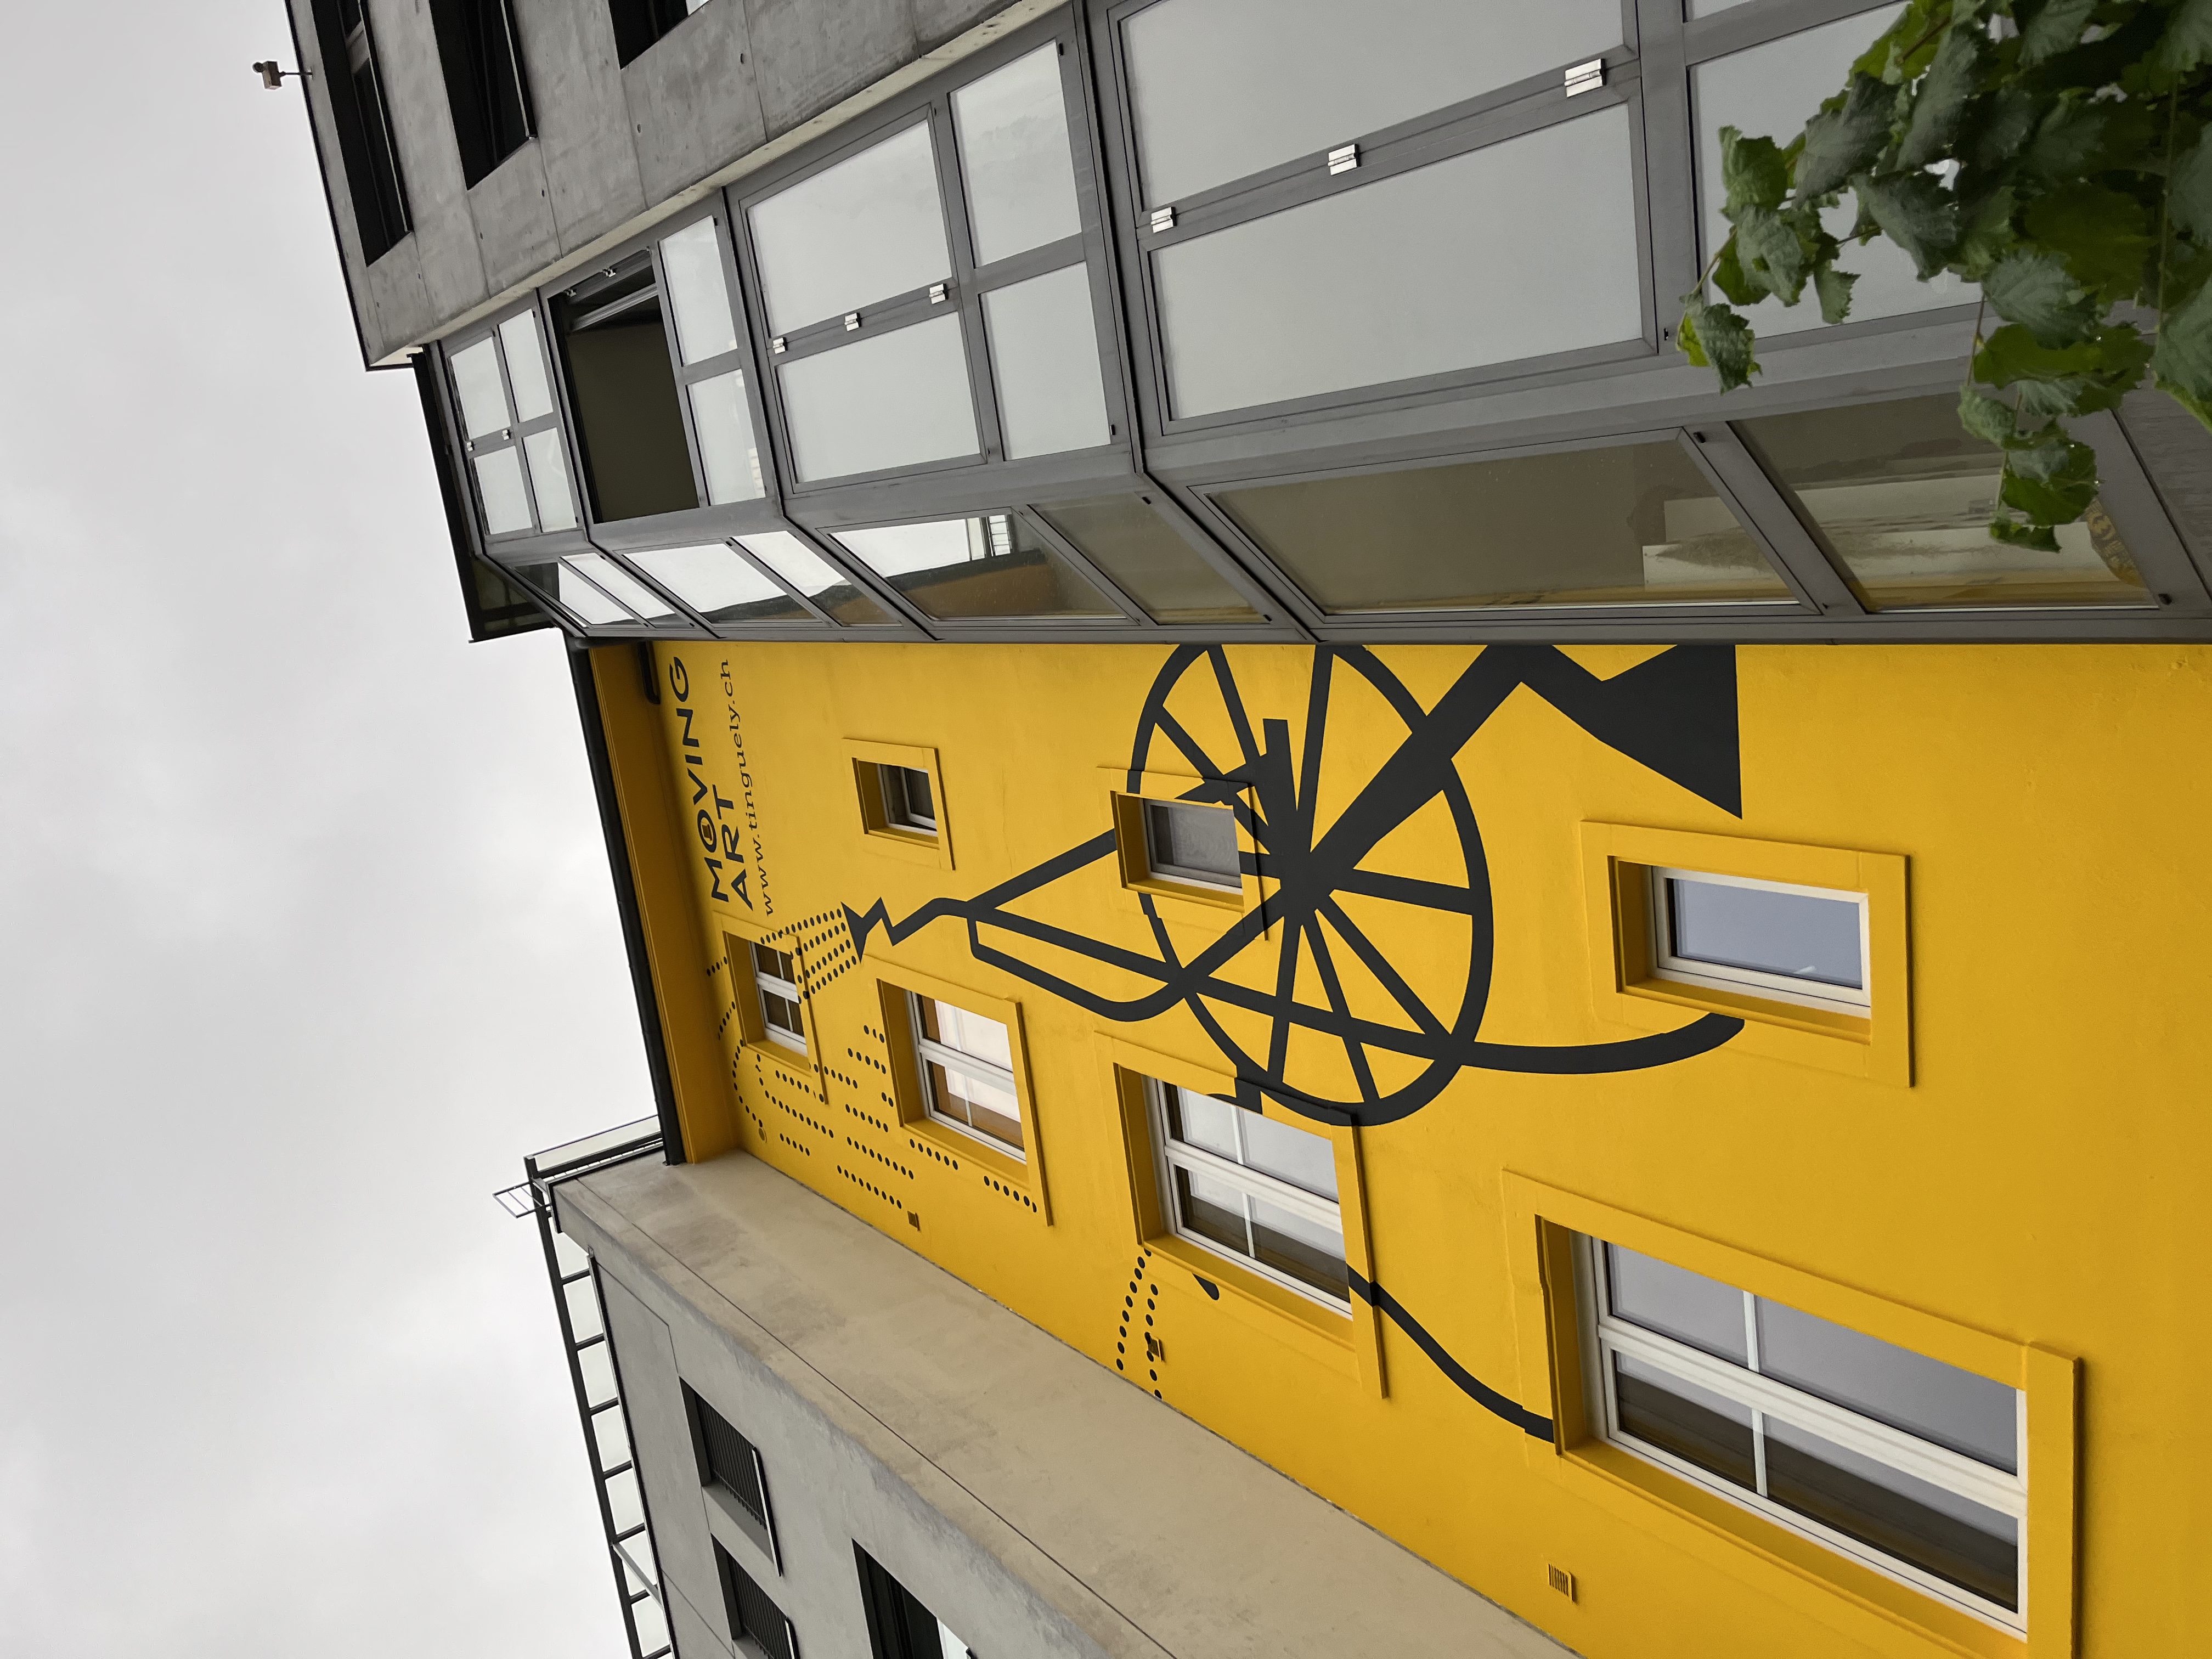 https://sarahweishaupt.ch/media/pages/home/illustration-fassade-fuer-museum-tinguely/3b74283e0d-1656364119/3627dabe-d8cf-46c8-b0ba-add298770446.jpeg